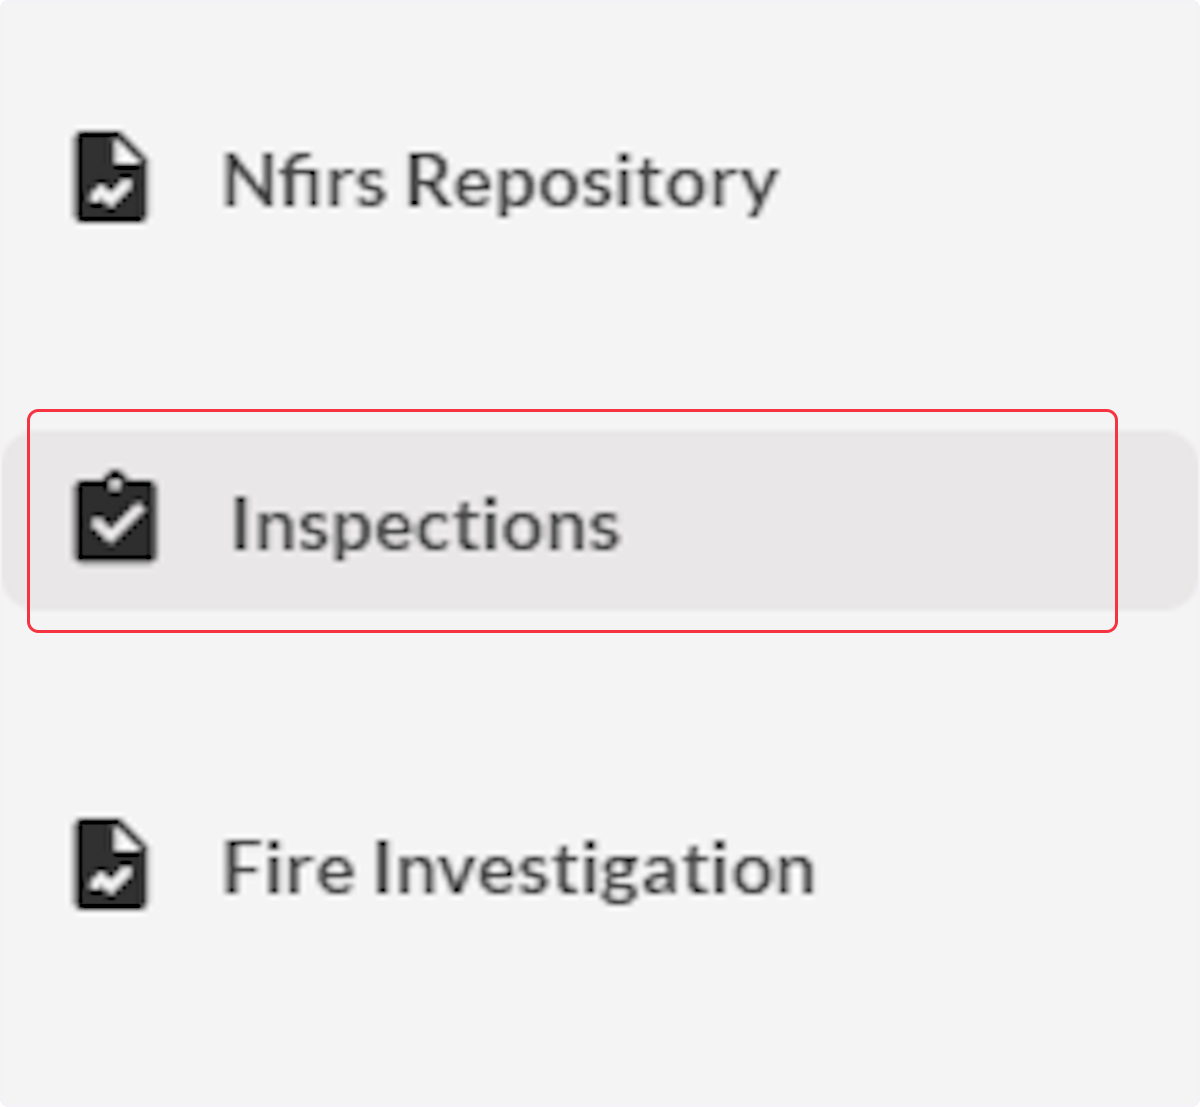 Click on Inspections.